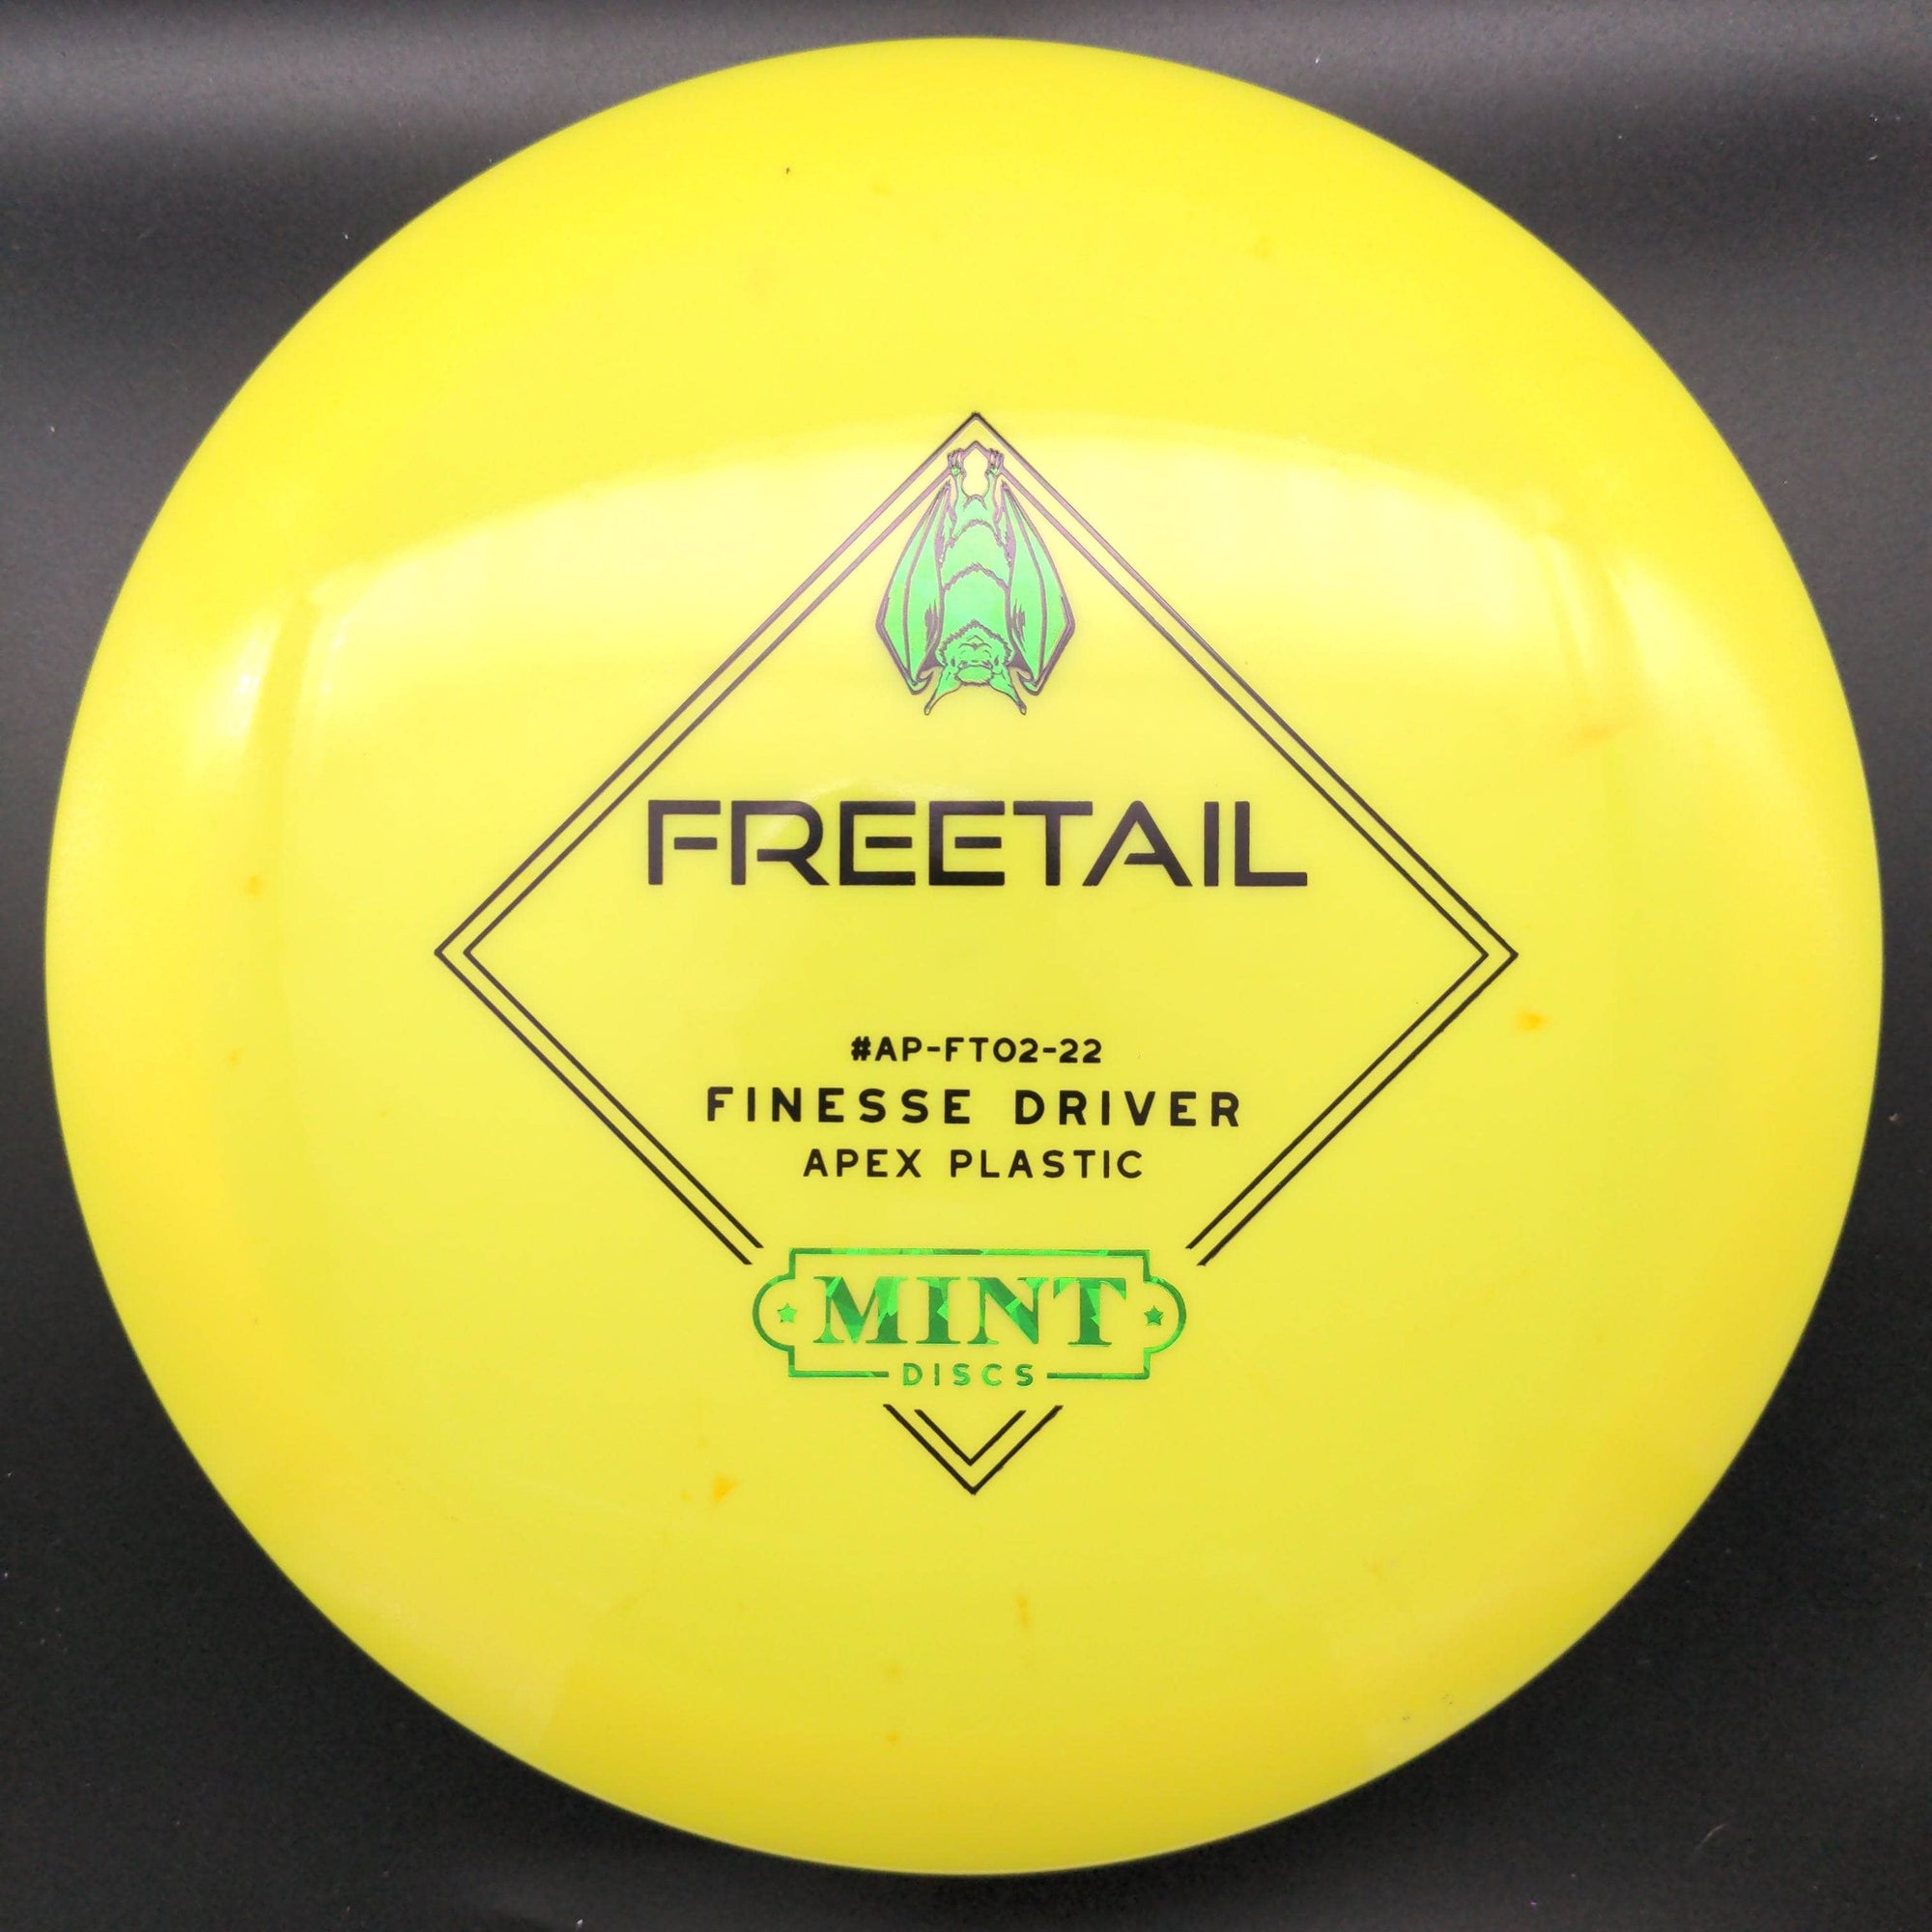 Mint Discs Fairway Driver Yellow Green Shatter Stamp 173g Freetail, Apex Plastic